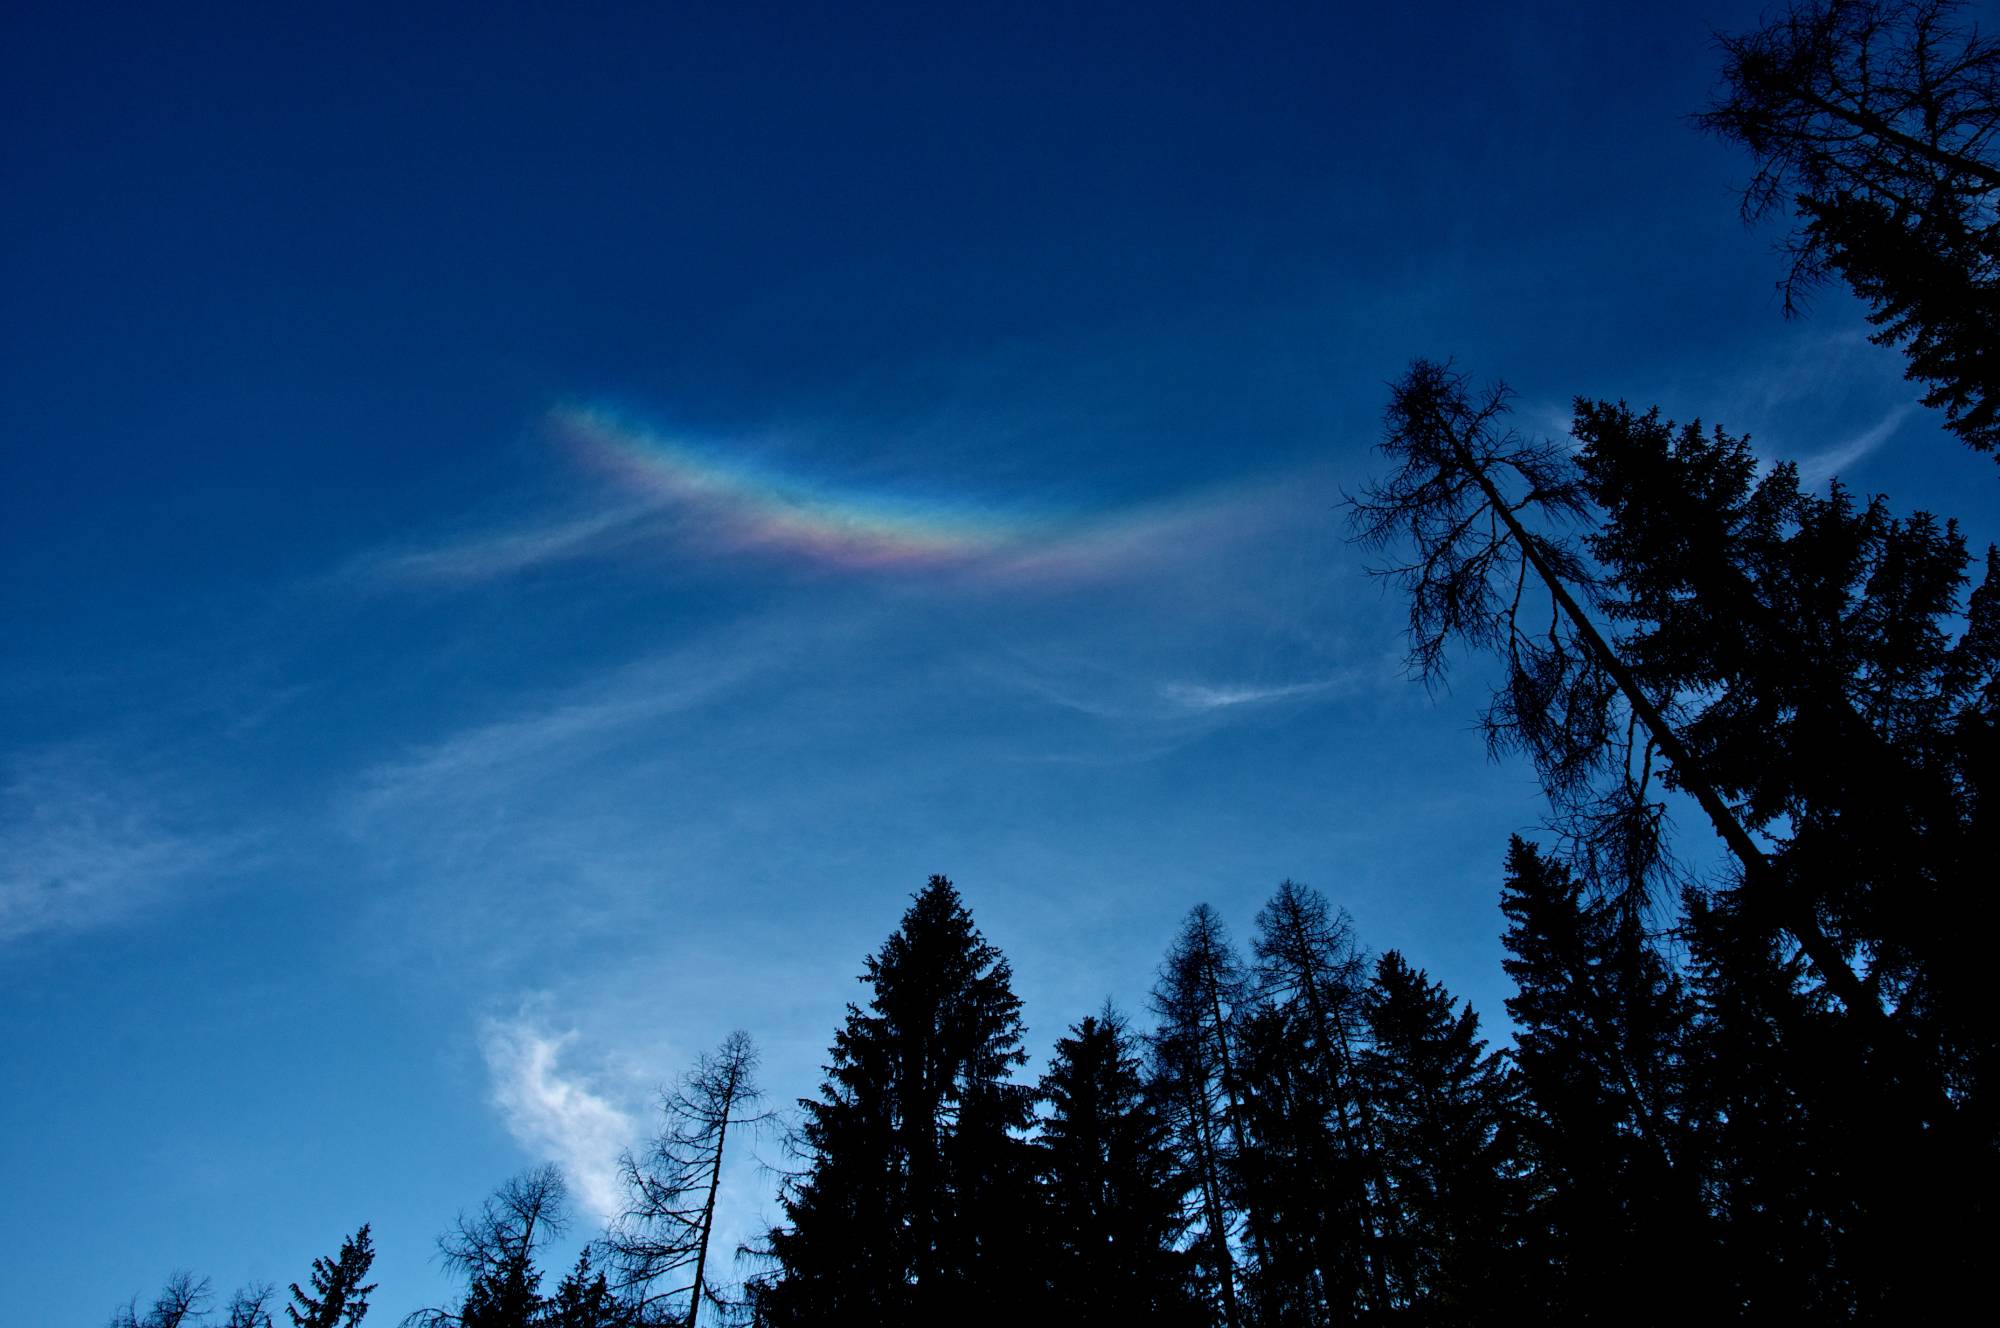 circumzenithal arc: 207 KB; click on the image to enlarge